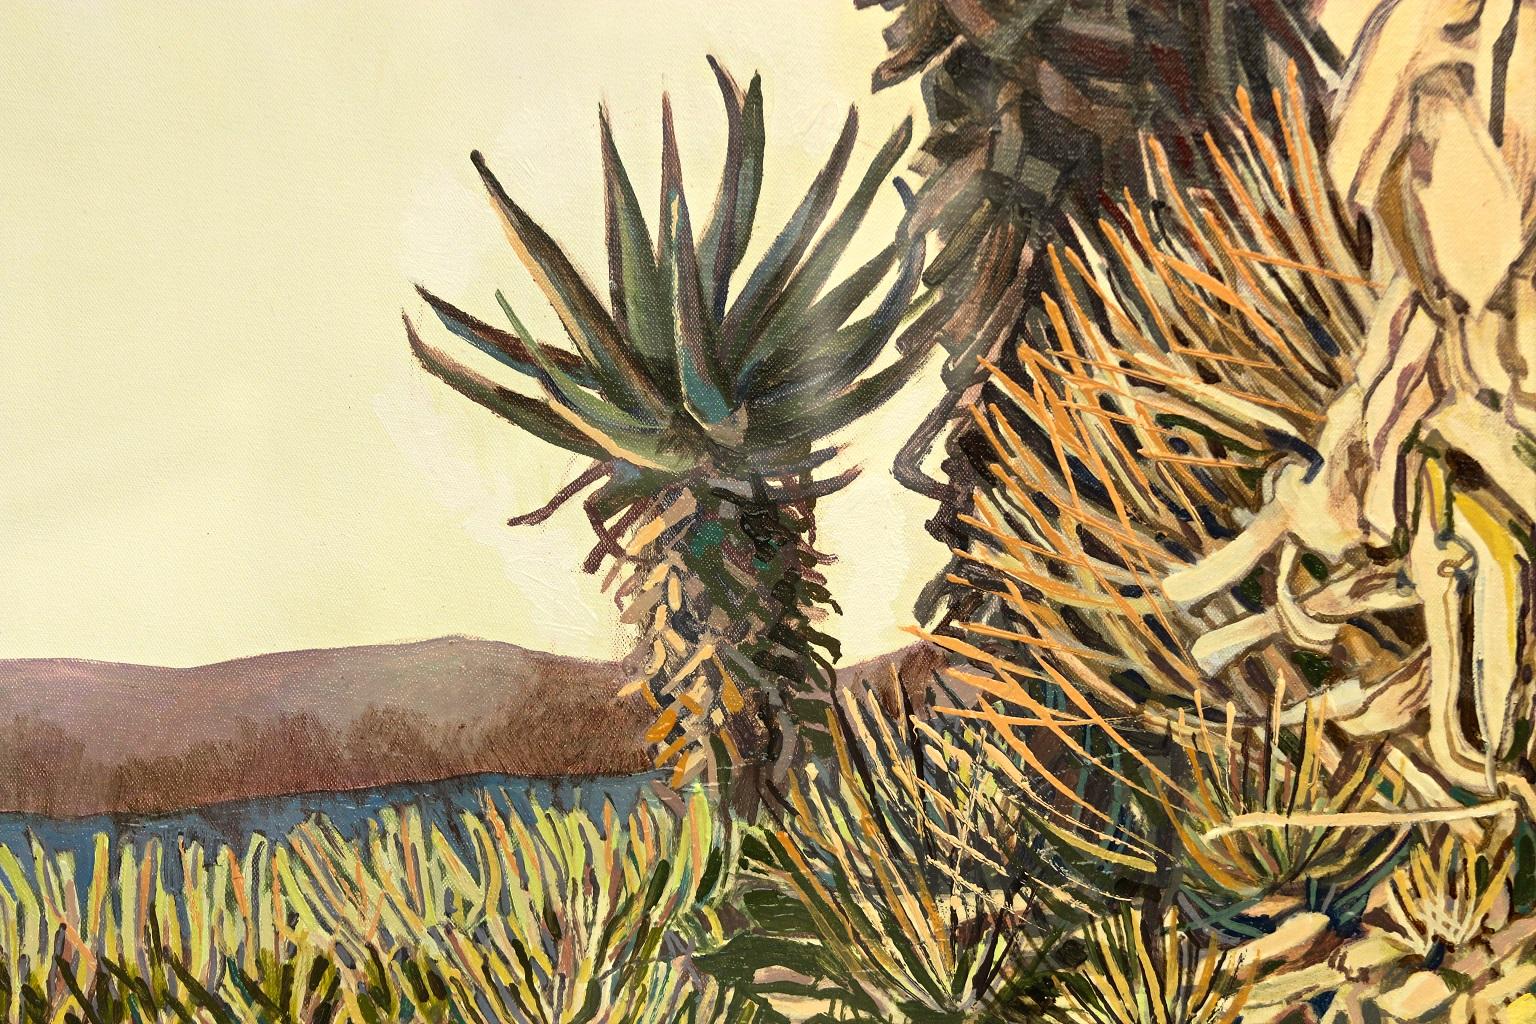 Dorothy’s oil on canvas works feature trees, plants, bushes, succulents, and landscape elements rendered in a way that speaks to the highly realistic, but enhanced with a painterly, expressive looseness of brush that allows her artistic personality